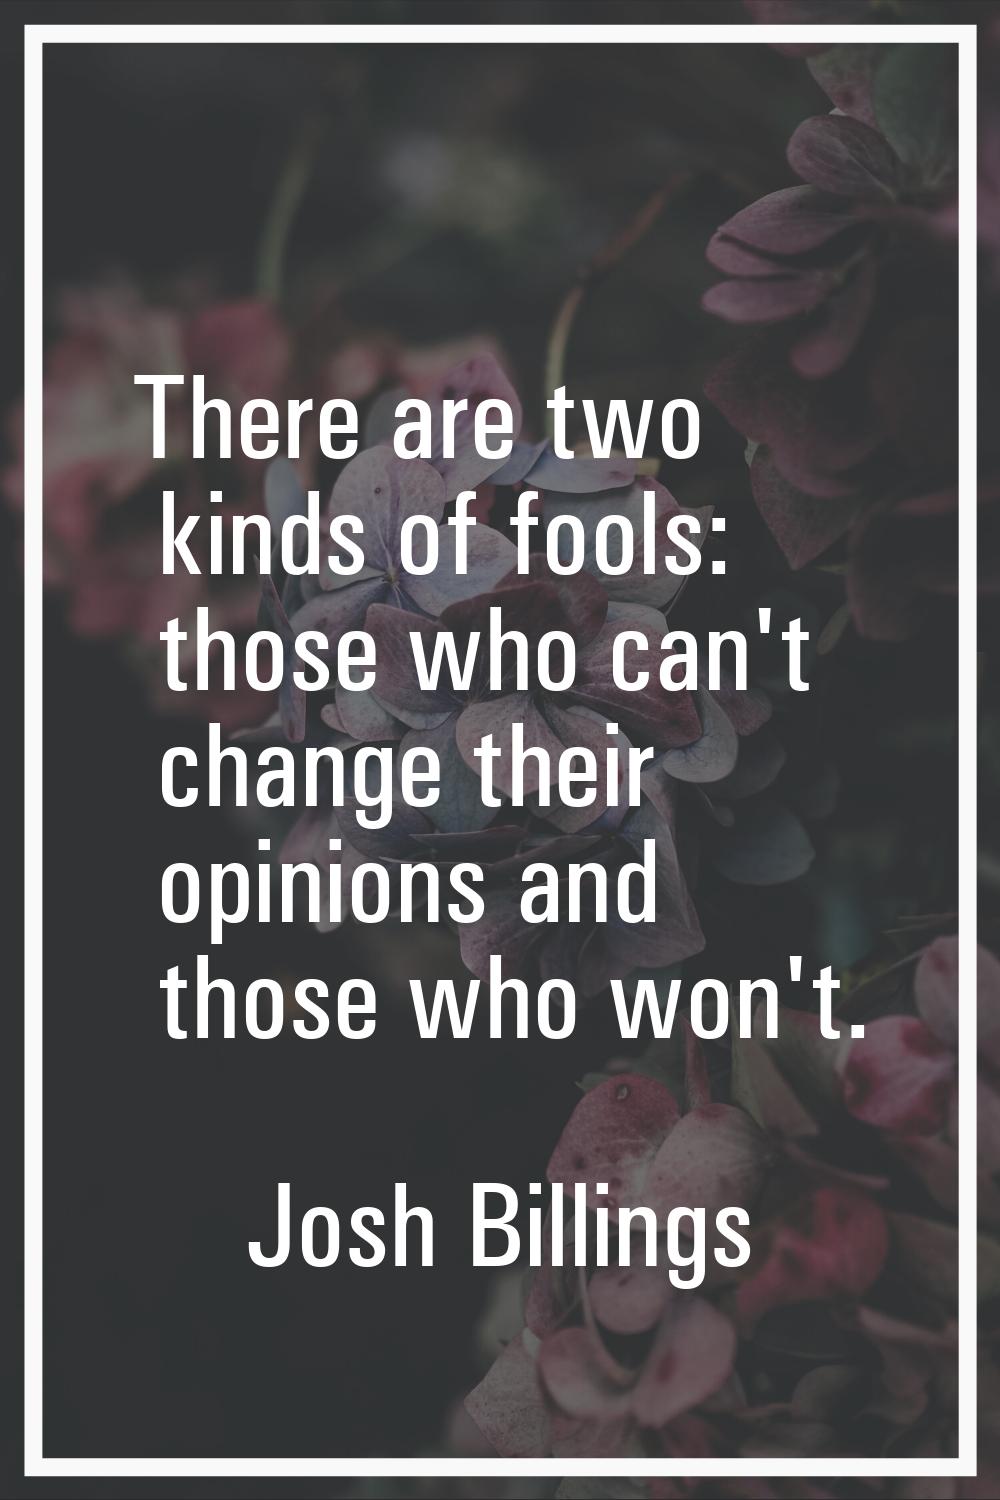 There are two kinds of fools: those who can't change their opinions and those who won't.